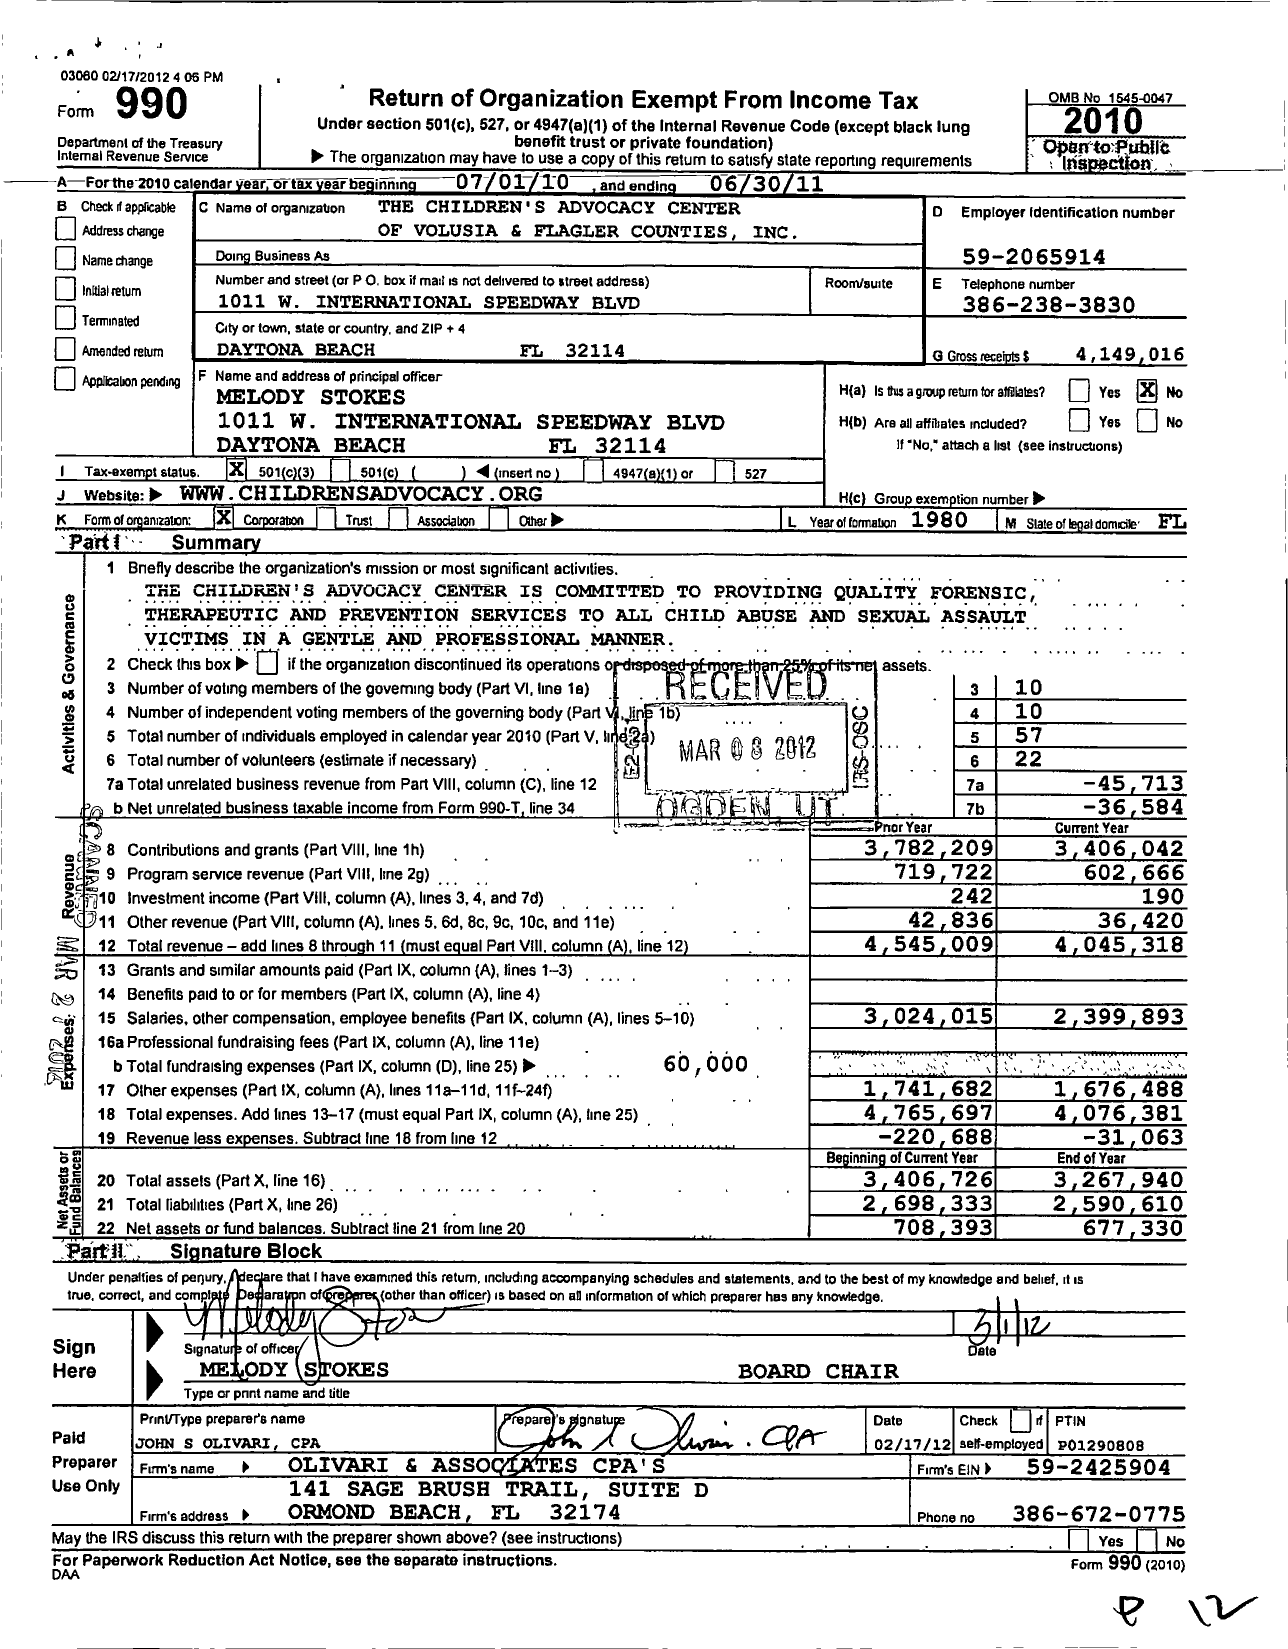 Image of first page of 2010 Form 990 for Children's Advocacy Center of Volusia and Flagler Counties